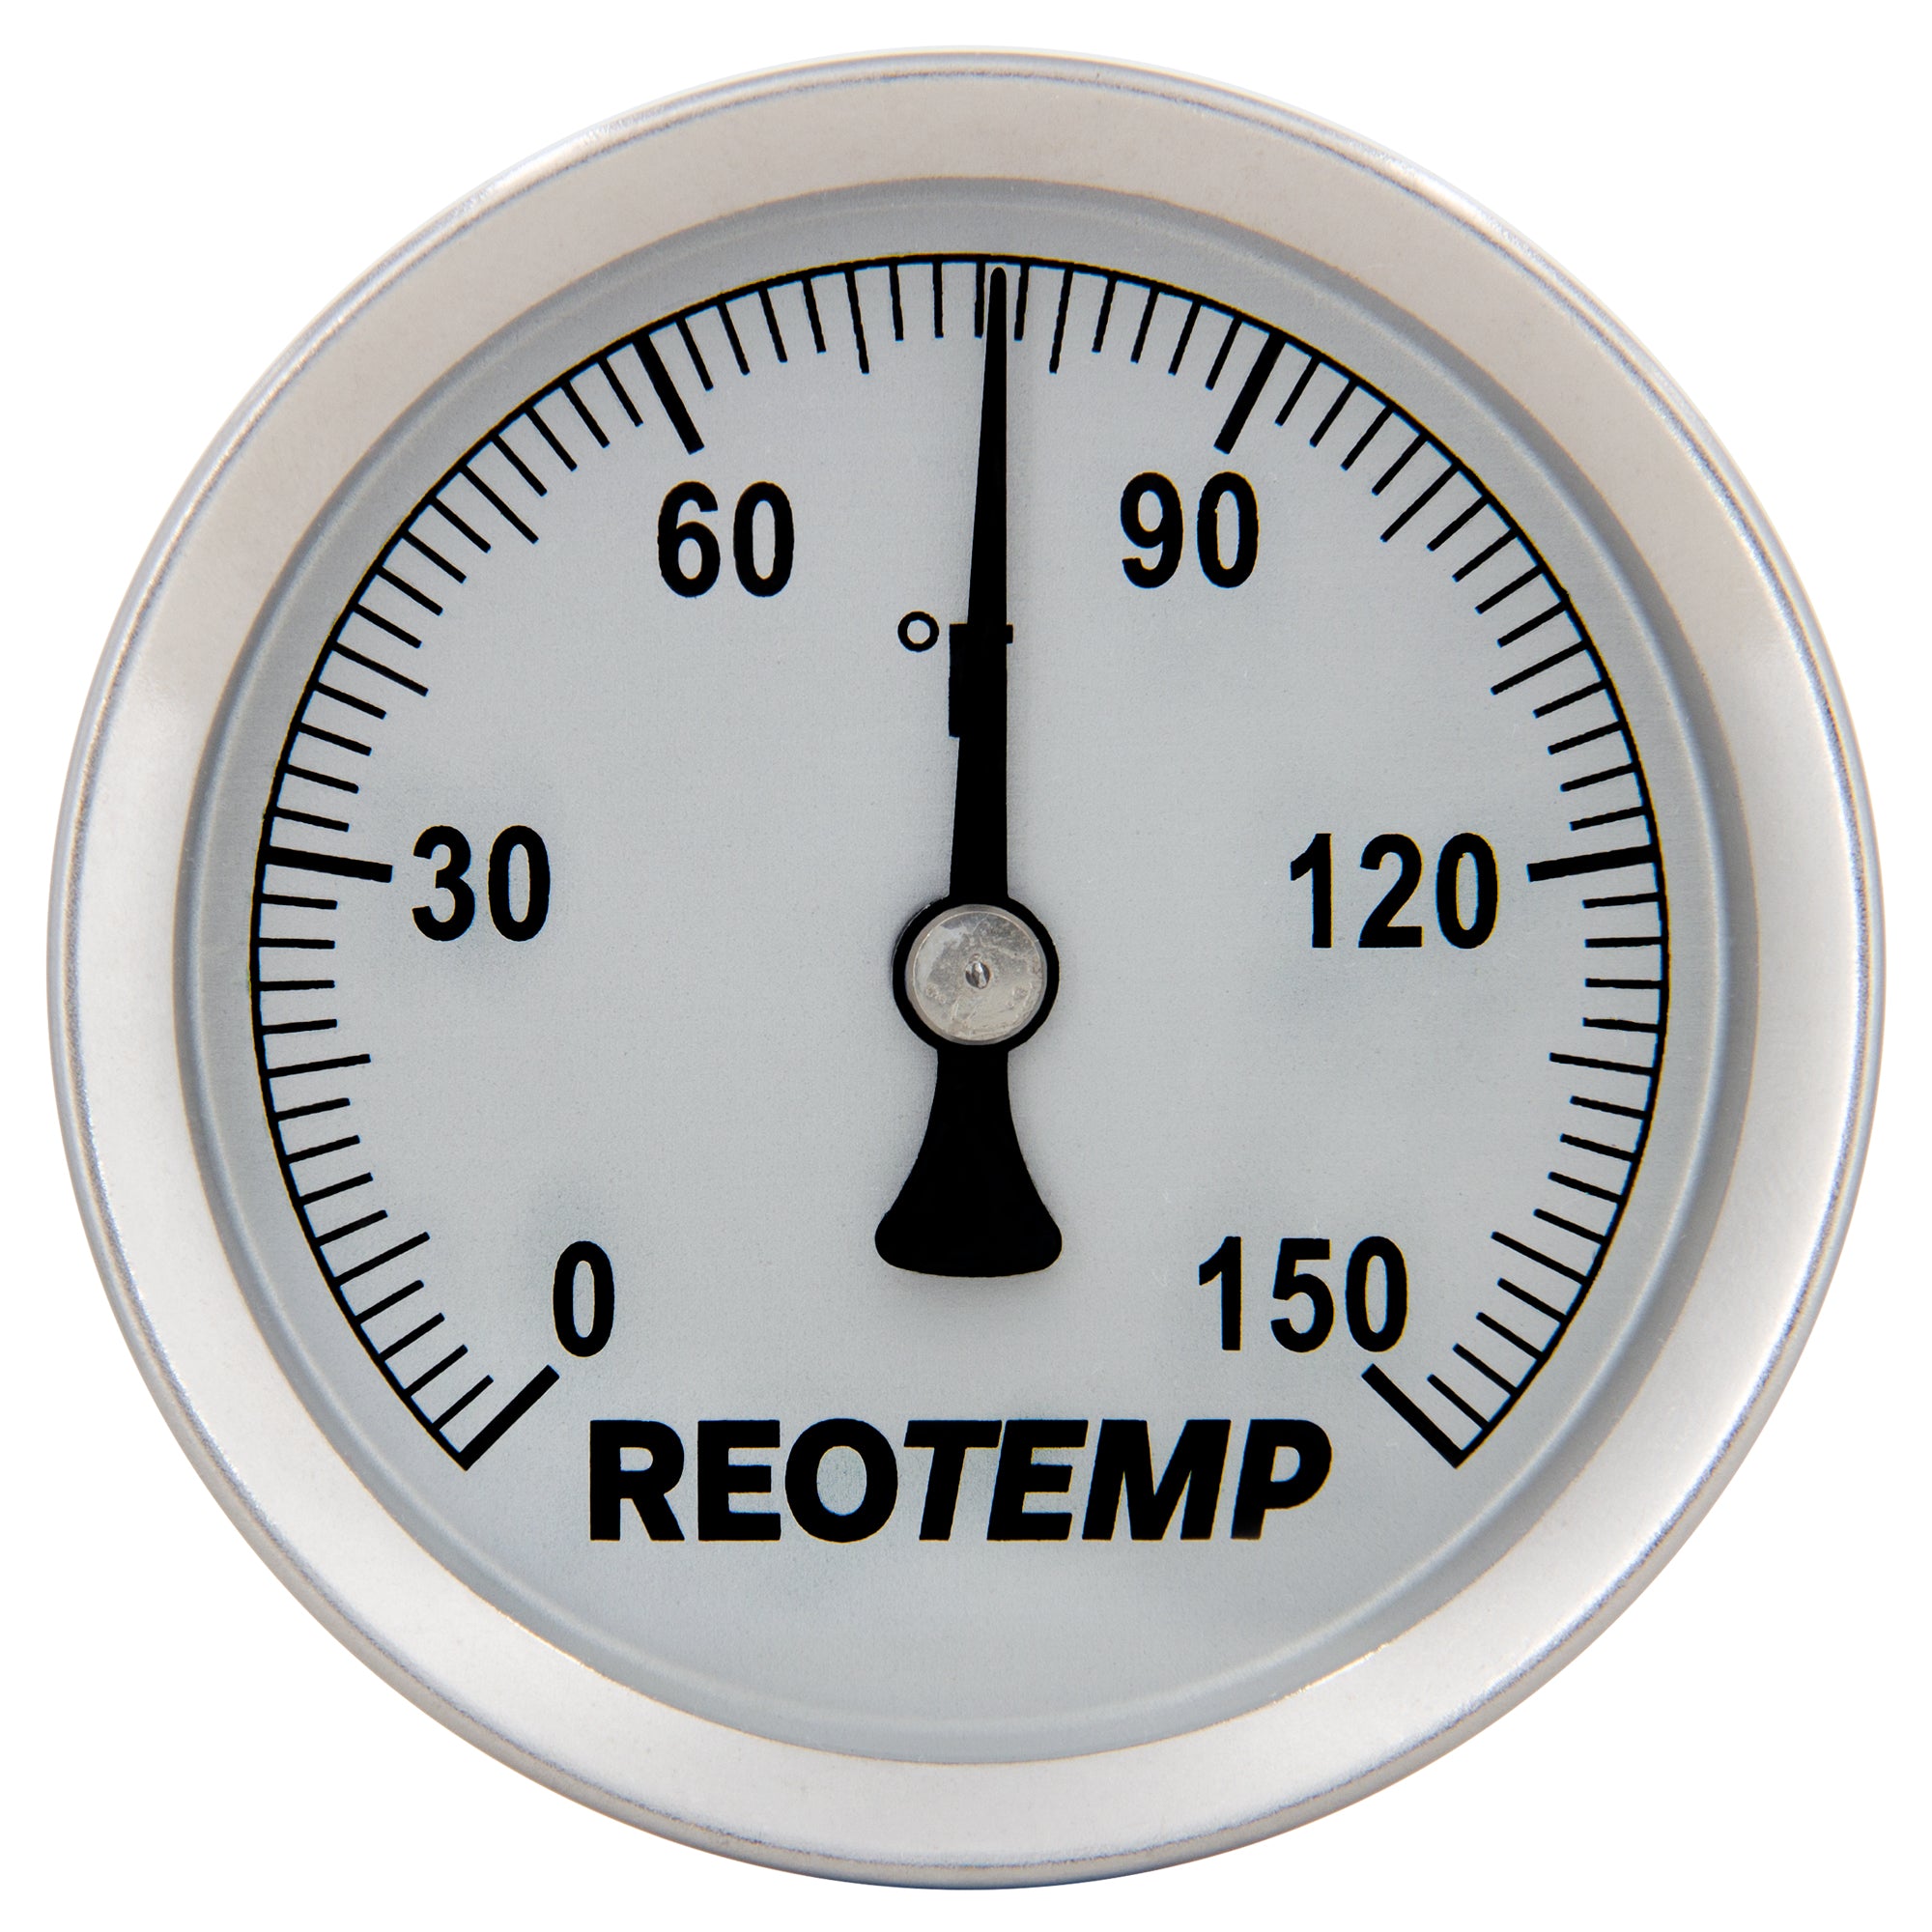 Magnetic thermometers 